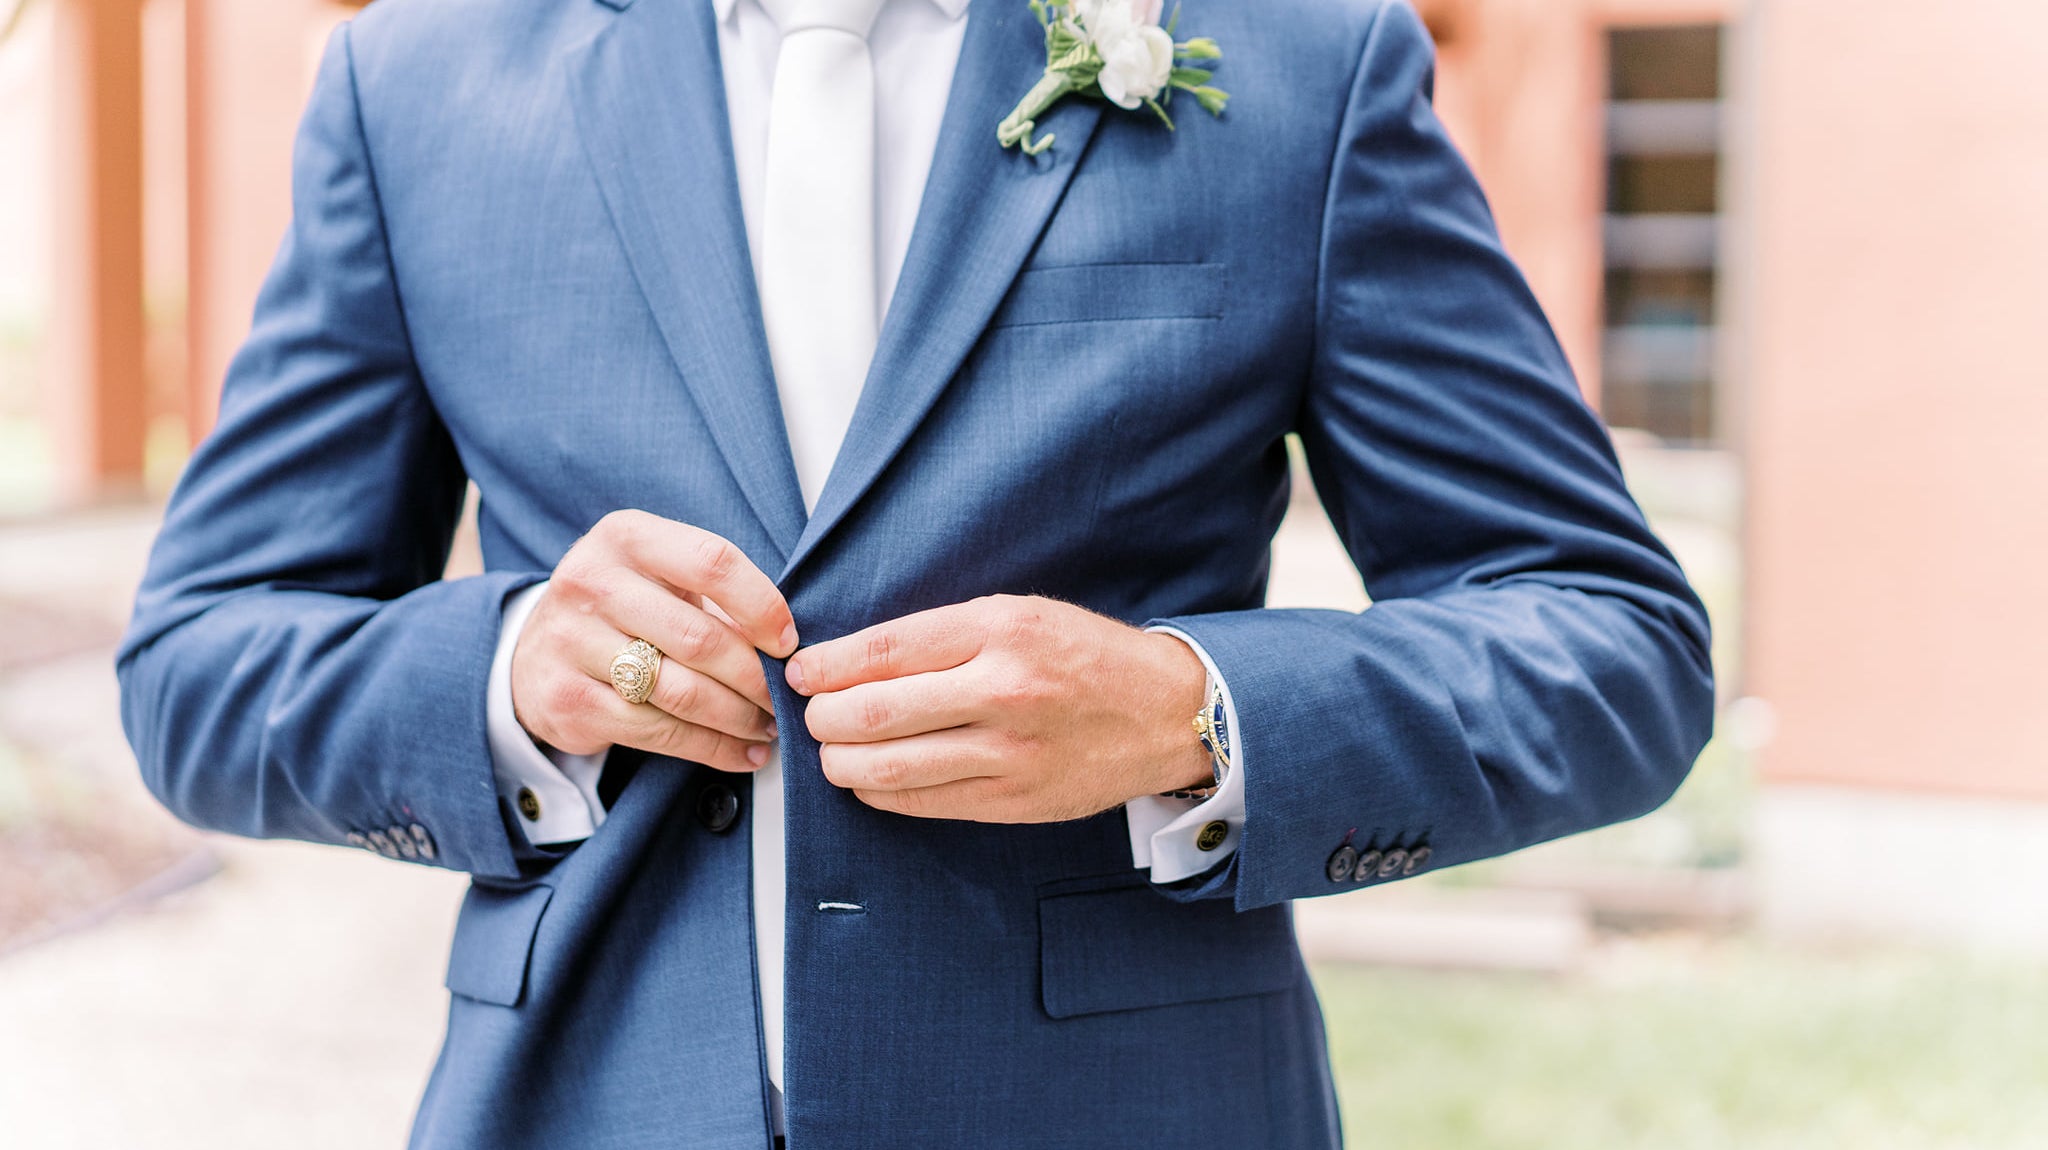 8 Common Mistakes When Wearing a Suit